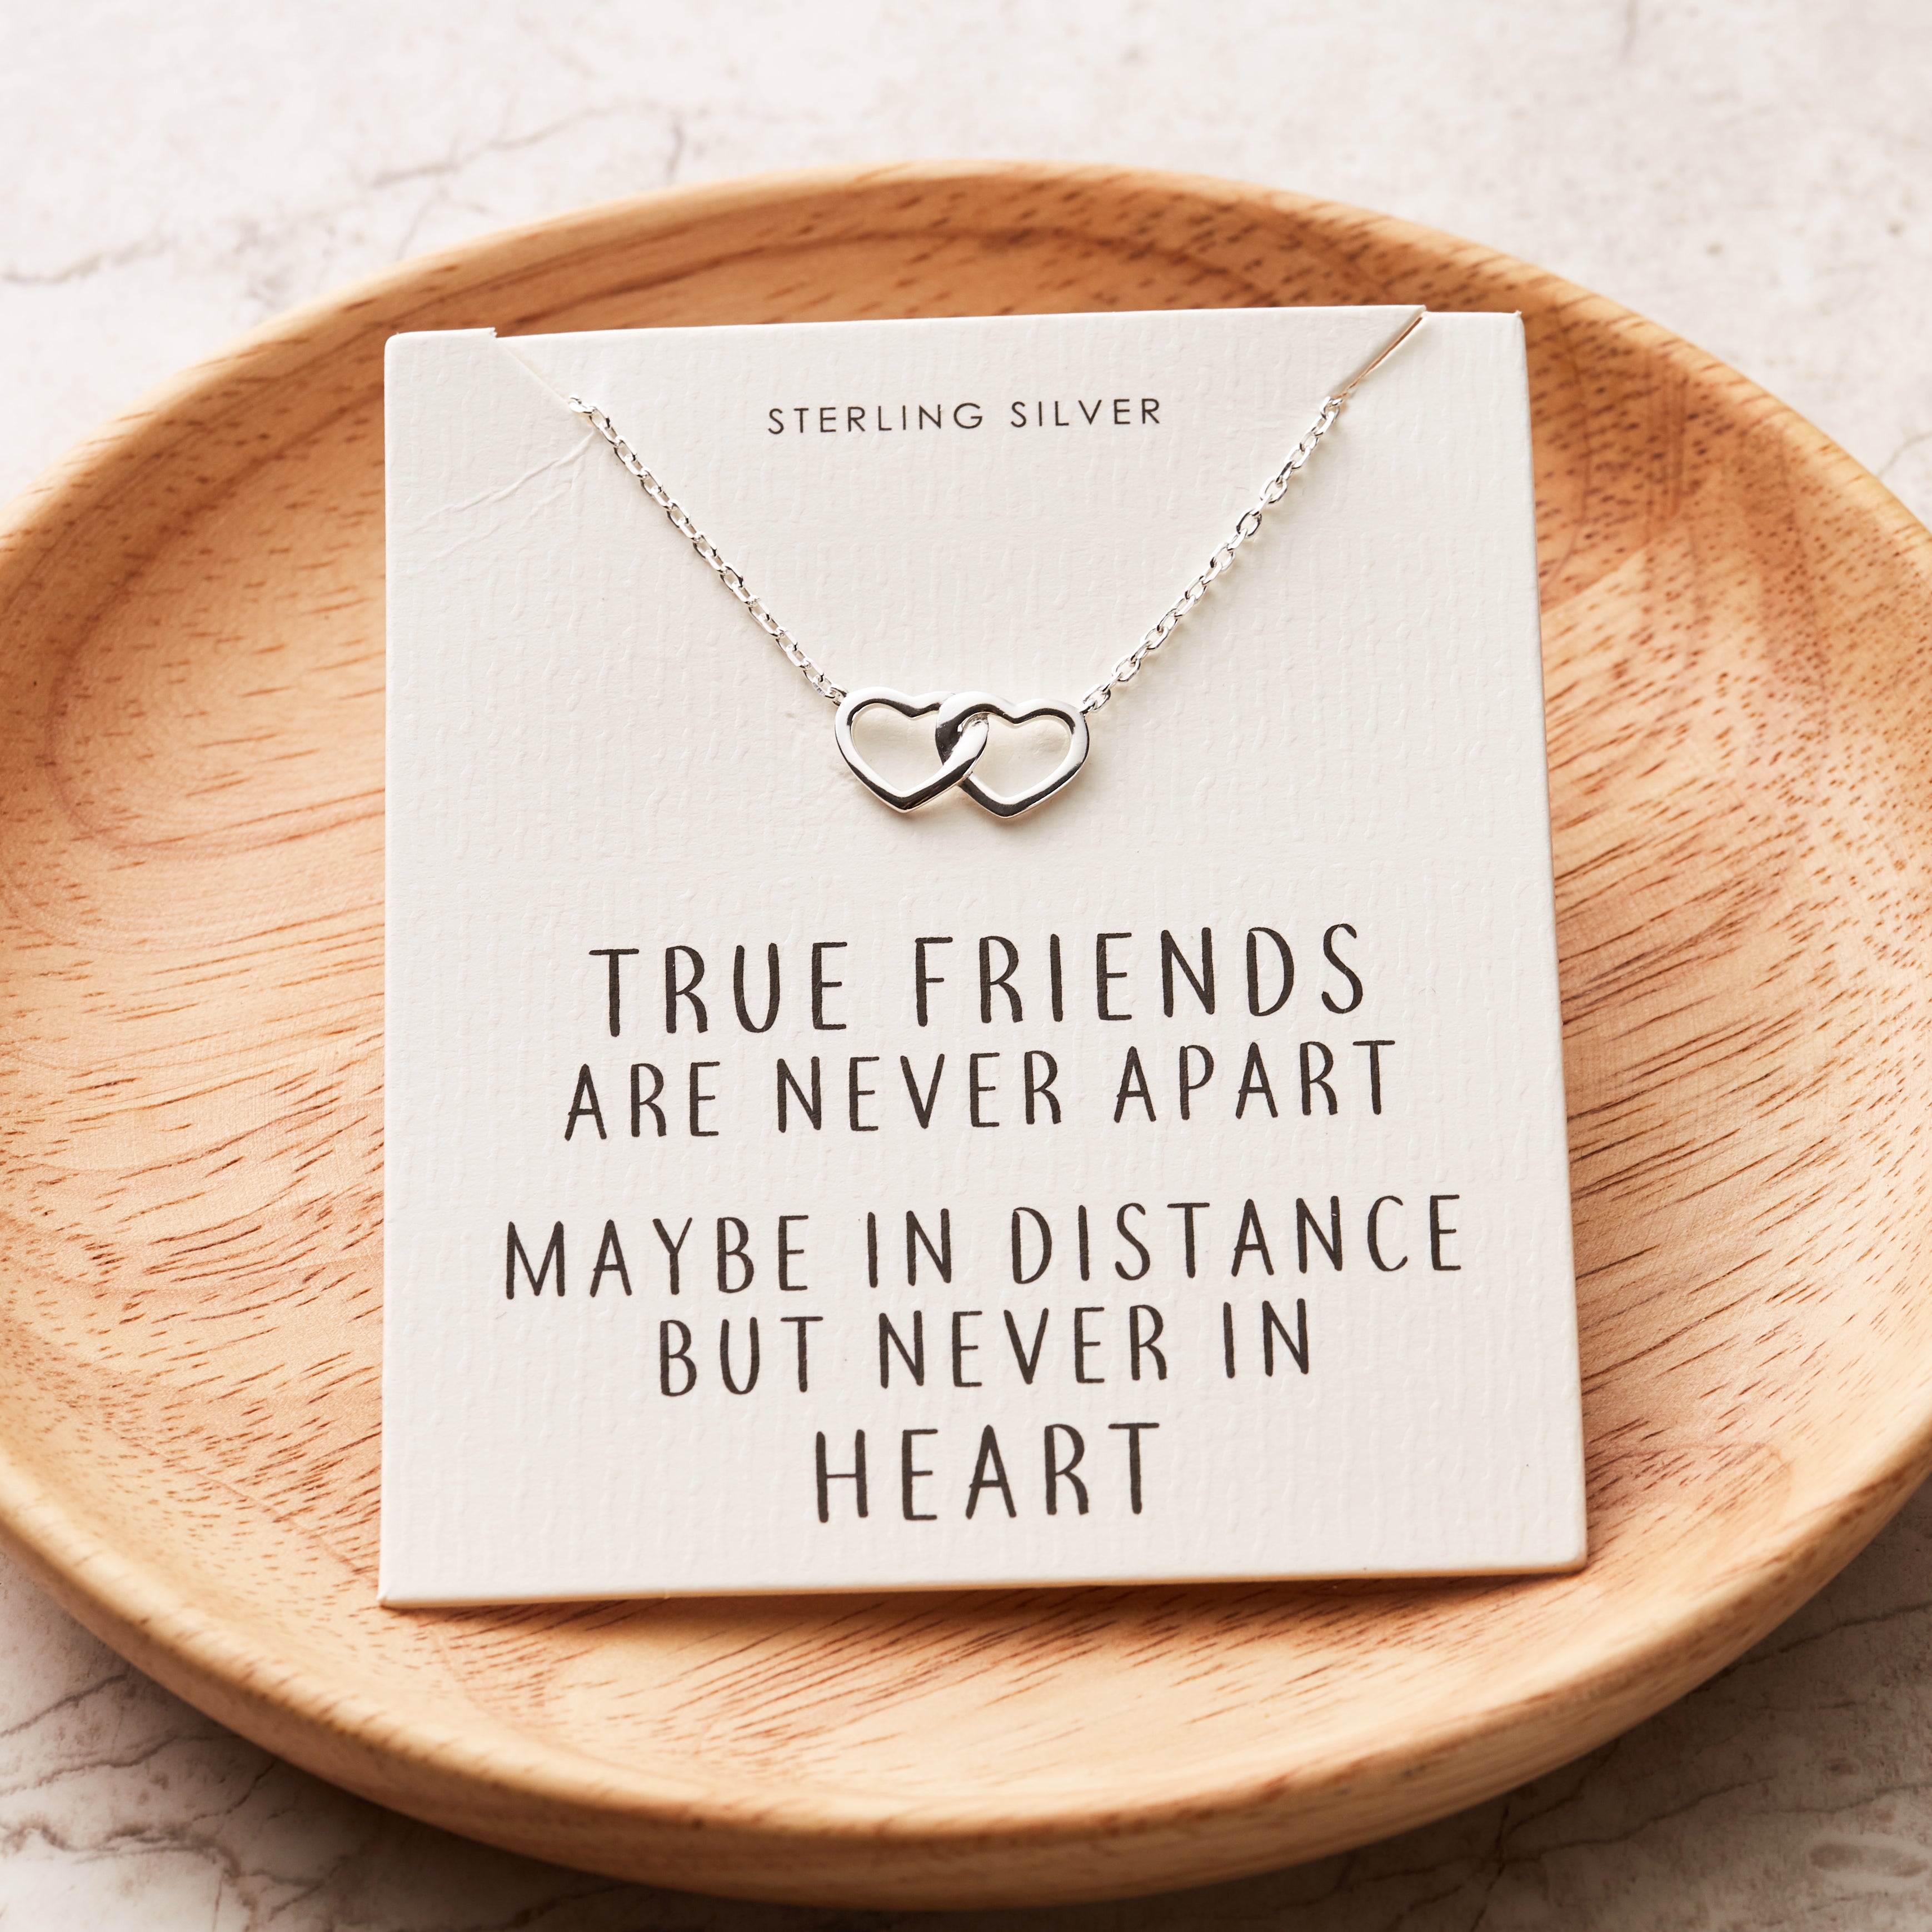 Sterling Silver True Friends Heart Link Necklace with Quote Card